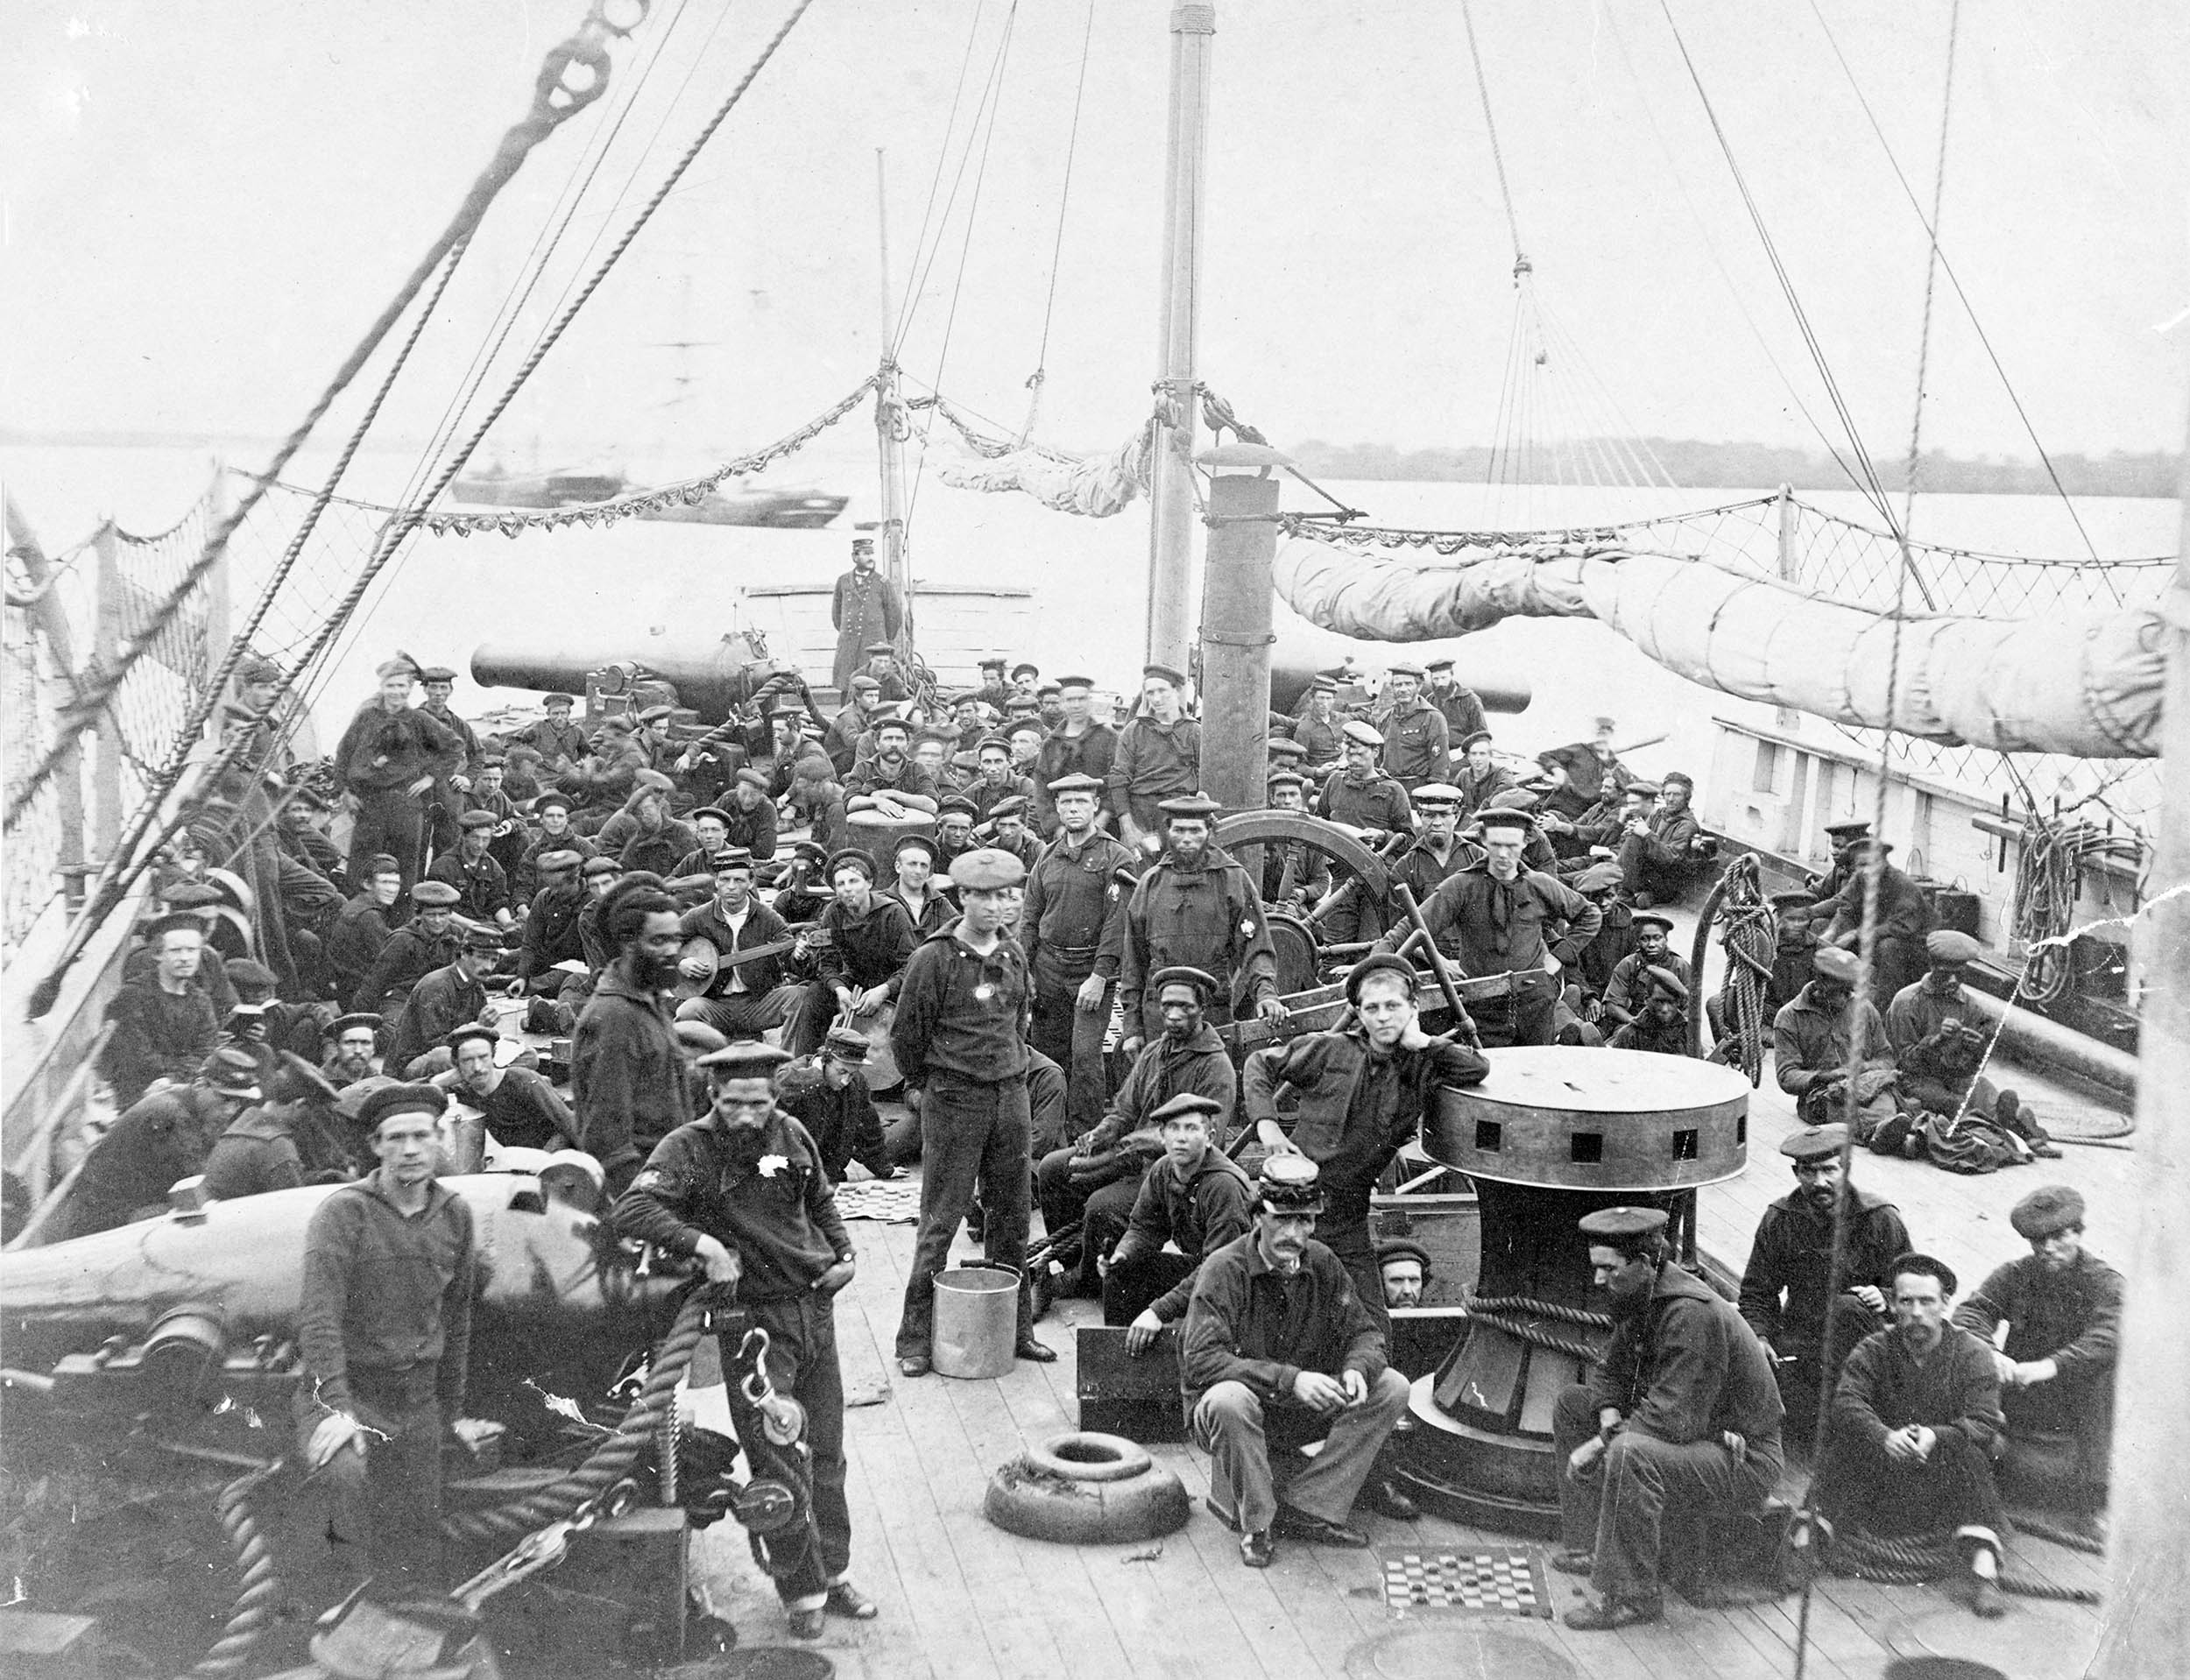 Members of USS Miami crew on forecastle, ca. 1864–1865; Frank W. Hackett, former officer of the ship, wrote in 1910: “The officer standing in the background, at the extreme prow of the ship, is W.N. Wells, Executive Officer. The man in the foreground with his arm on the nine-inch gun is White, the gunner. Sergeant of Marines, Stanley, is sitting in the foreground, near the capstan” (Naval History and Heritage Command)